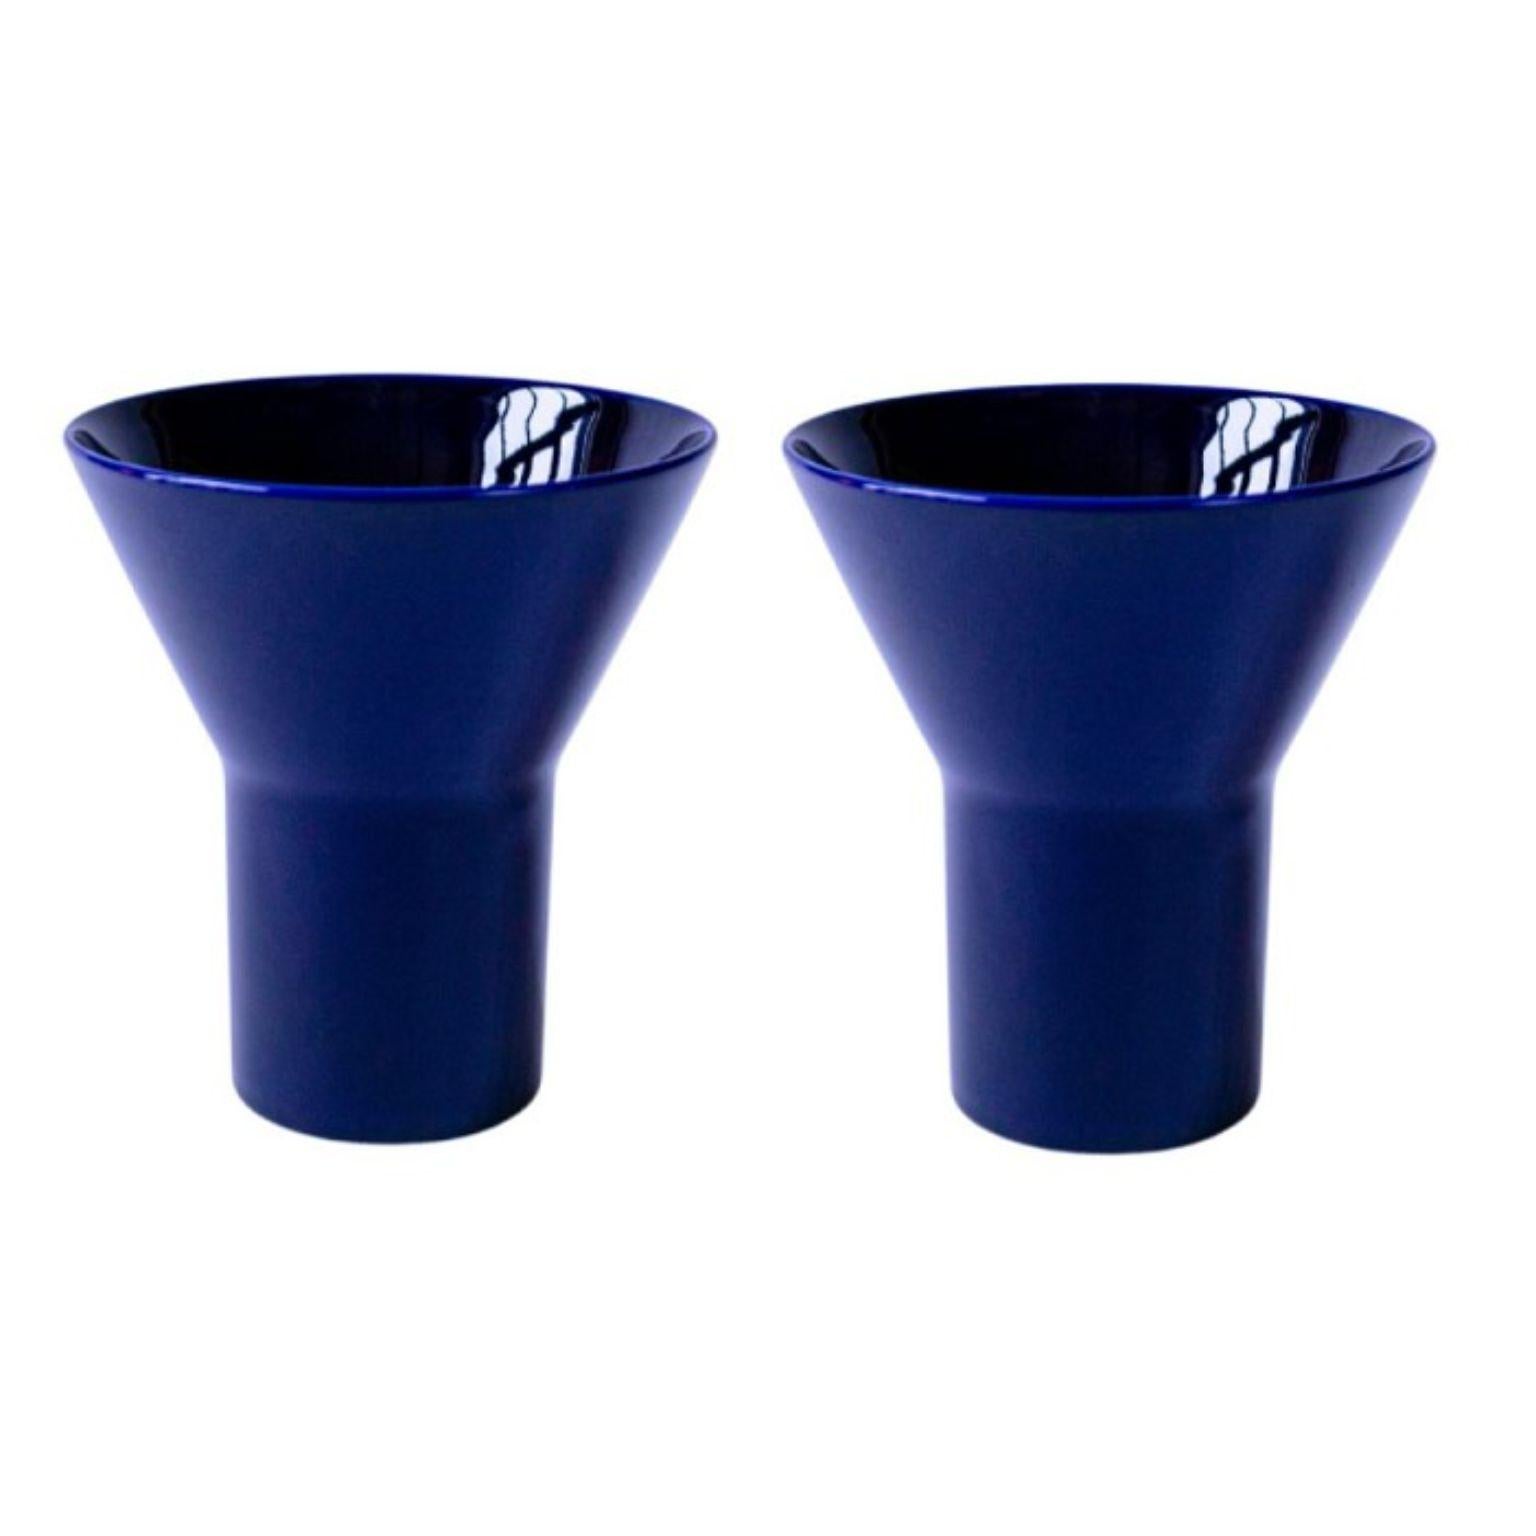 Set of 2 medium blue ceramic KYO vases by Mazo Design
Dimensions: D 19.5 x H 21.5 cm
Materials: Glazed Ceramic.

Both functional and sculptural, the new collection from mazo is very Scandinavian and Japanese at the same time. The series consists